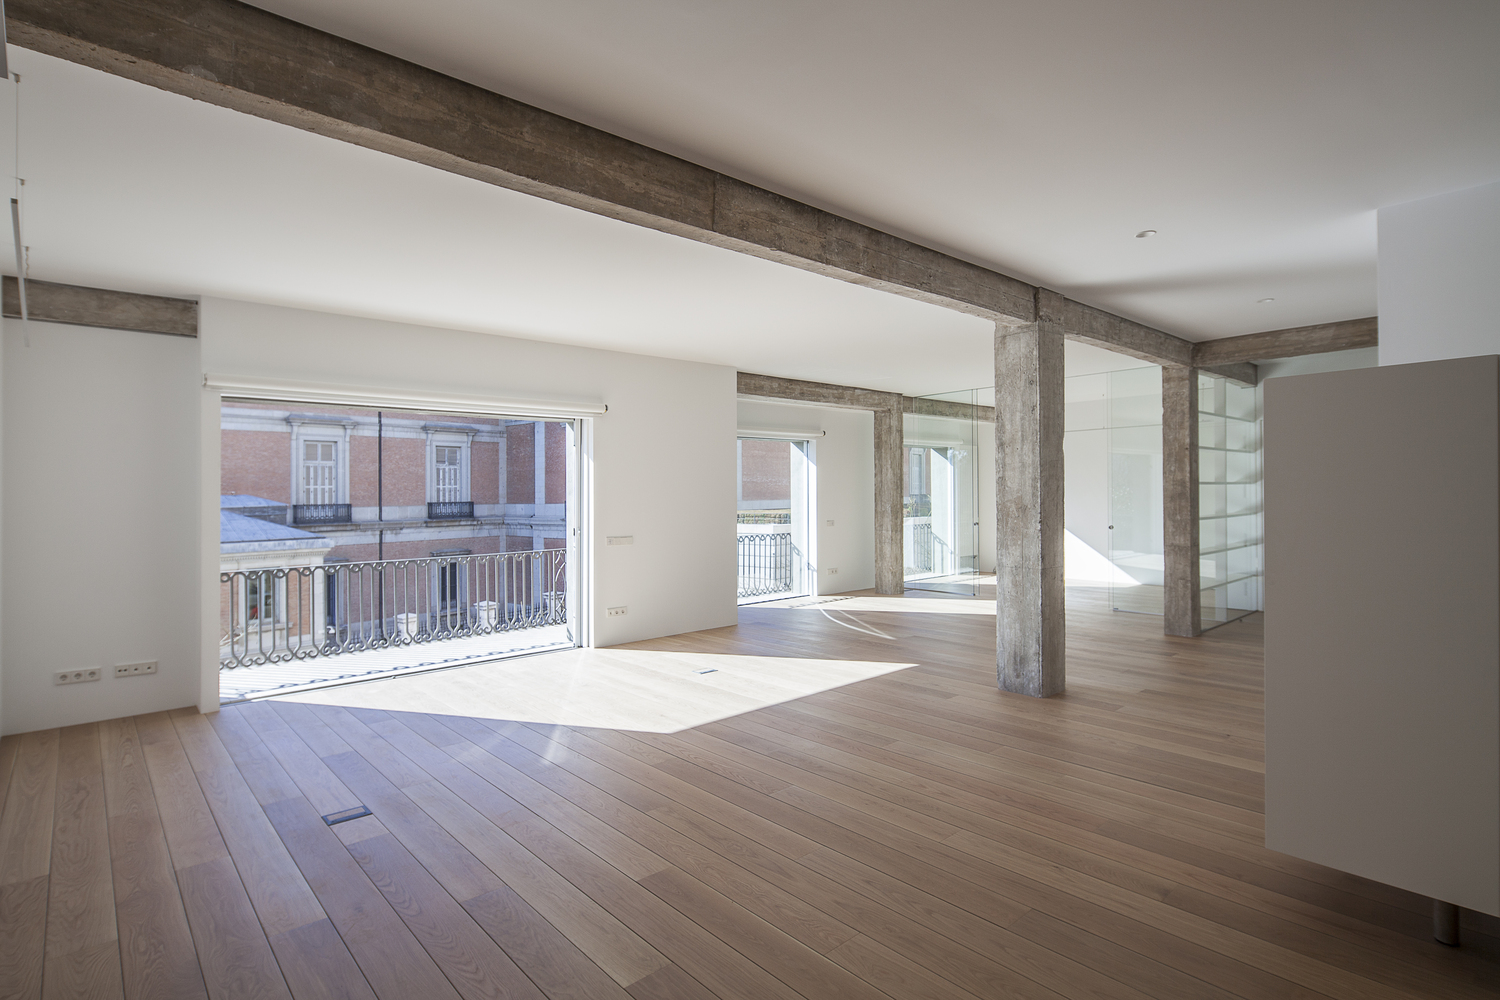 Apartment Renovation in Madrid by Jesús Aparicio Architectural Office